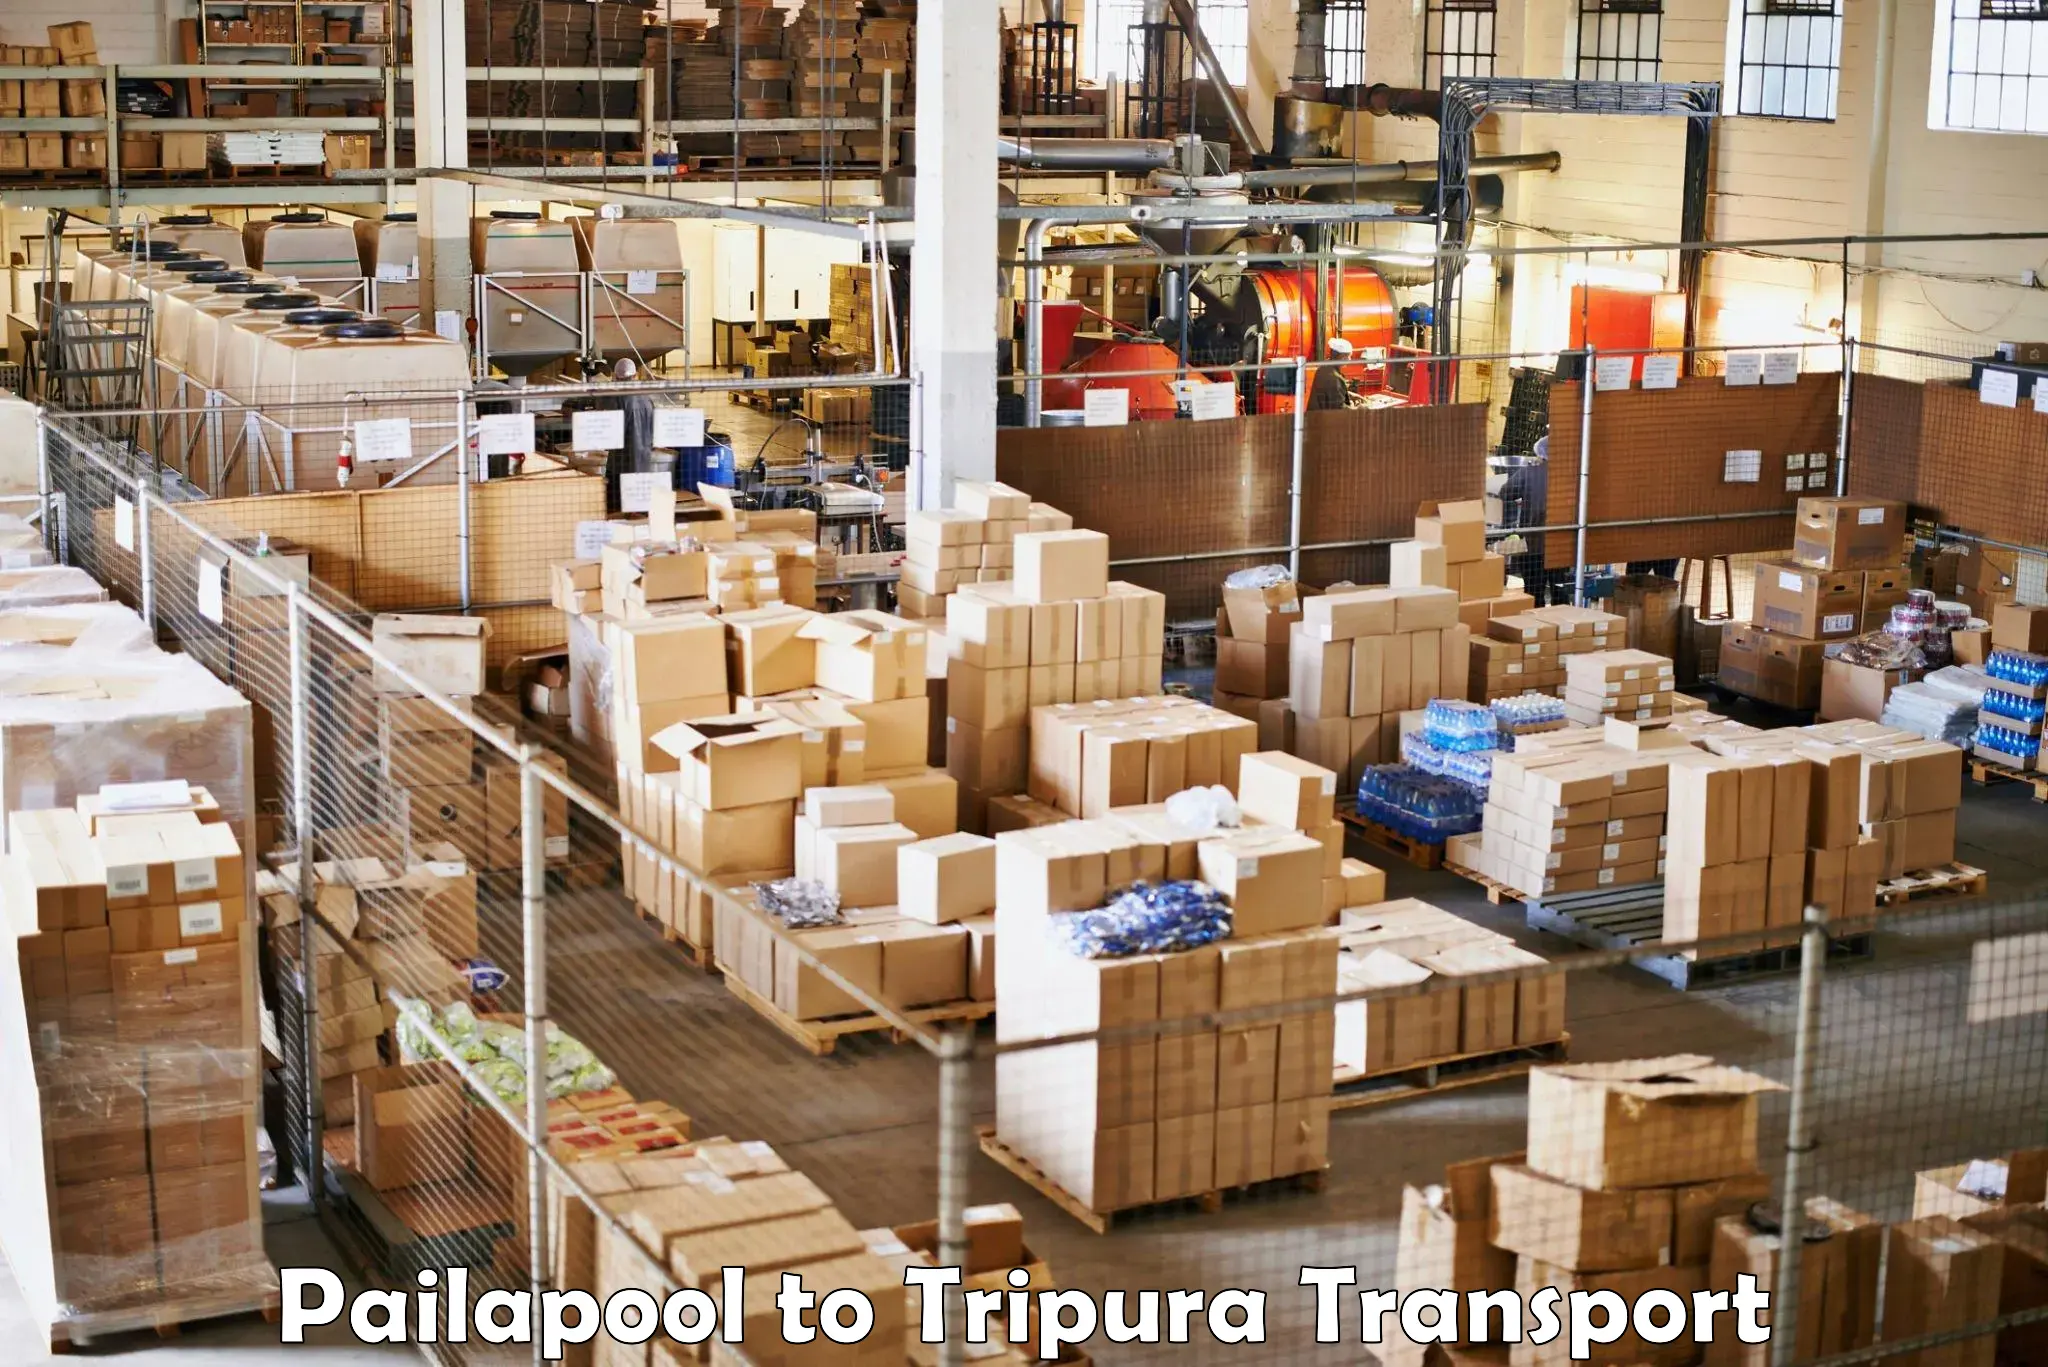 Road transport online services Pailapool to Udaipur Tripura